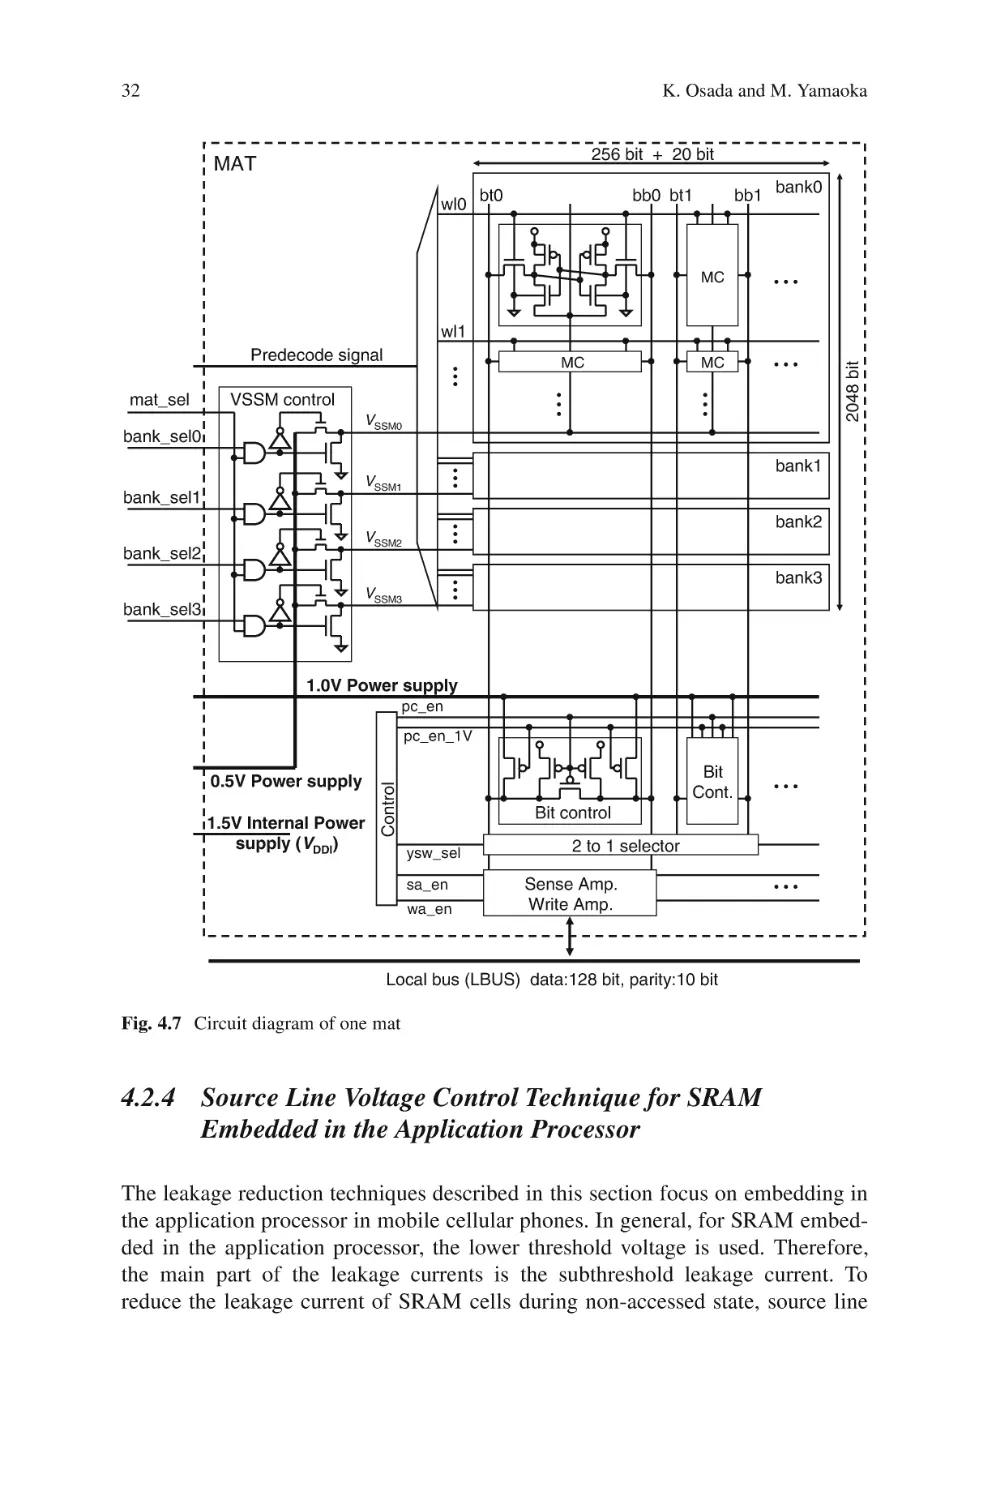 4.2.4 Source Line Voltage Control Technique for SRAM Embedded in the Application Processor